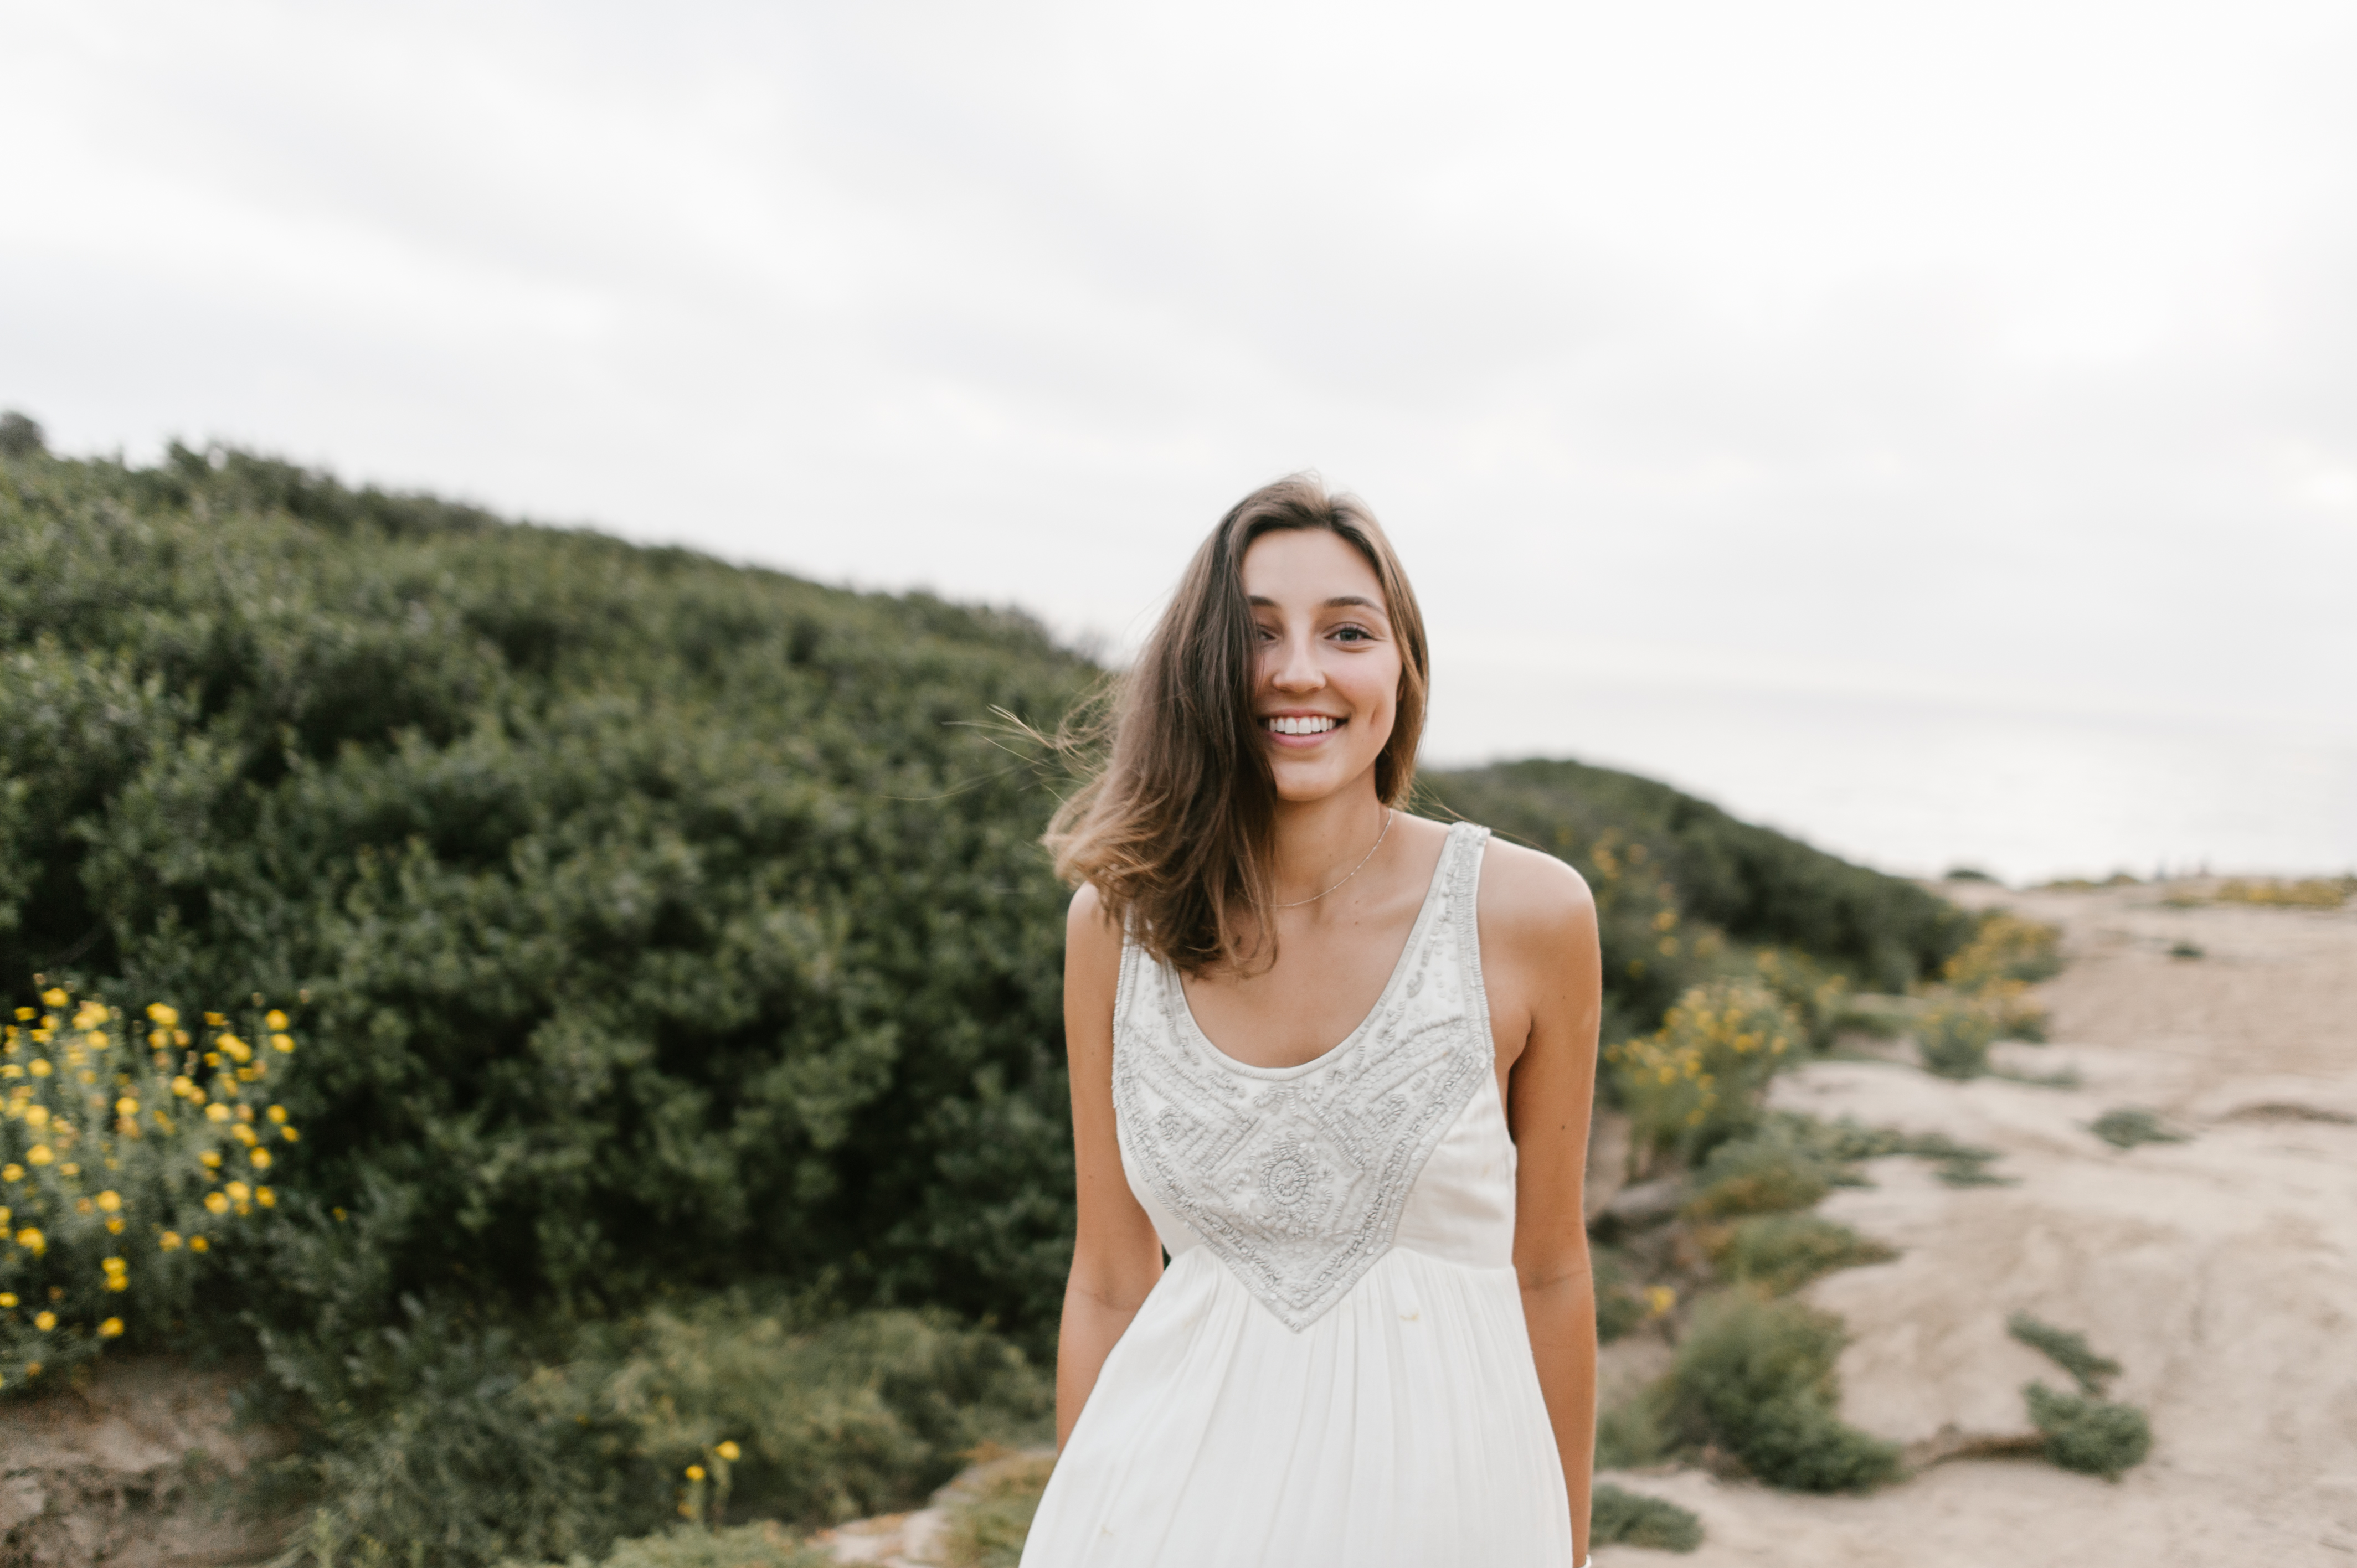 Sunset Cliffs Flower Field Senior Session by Kylie Rae Photography